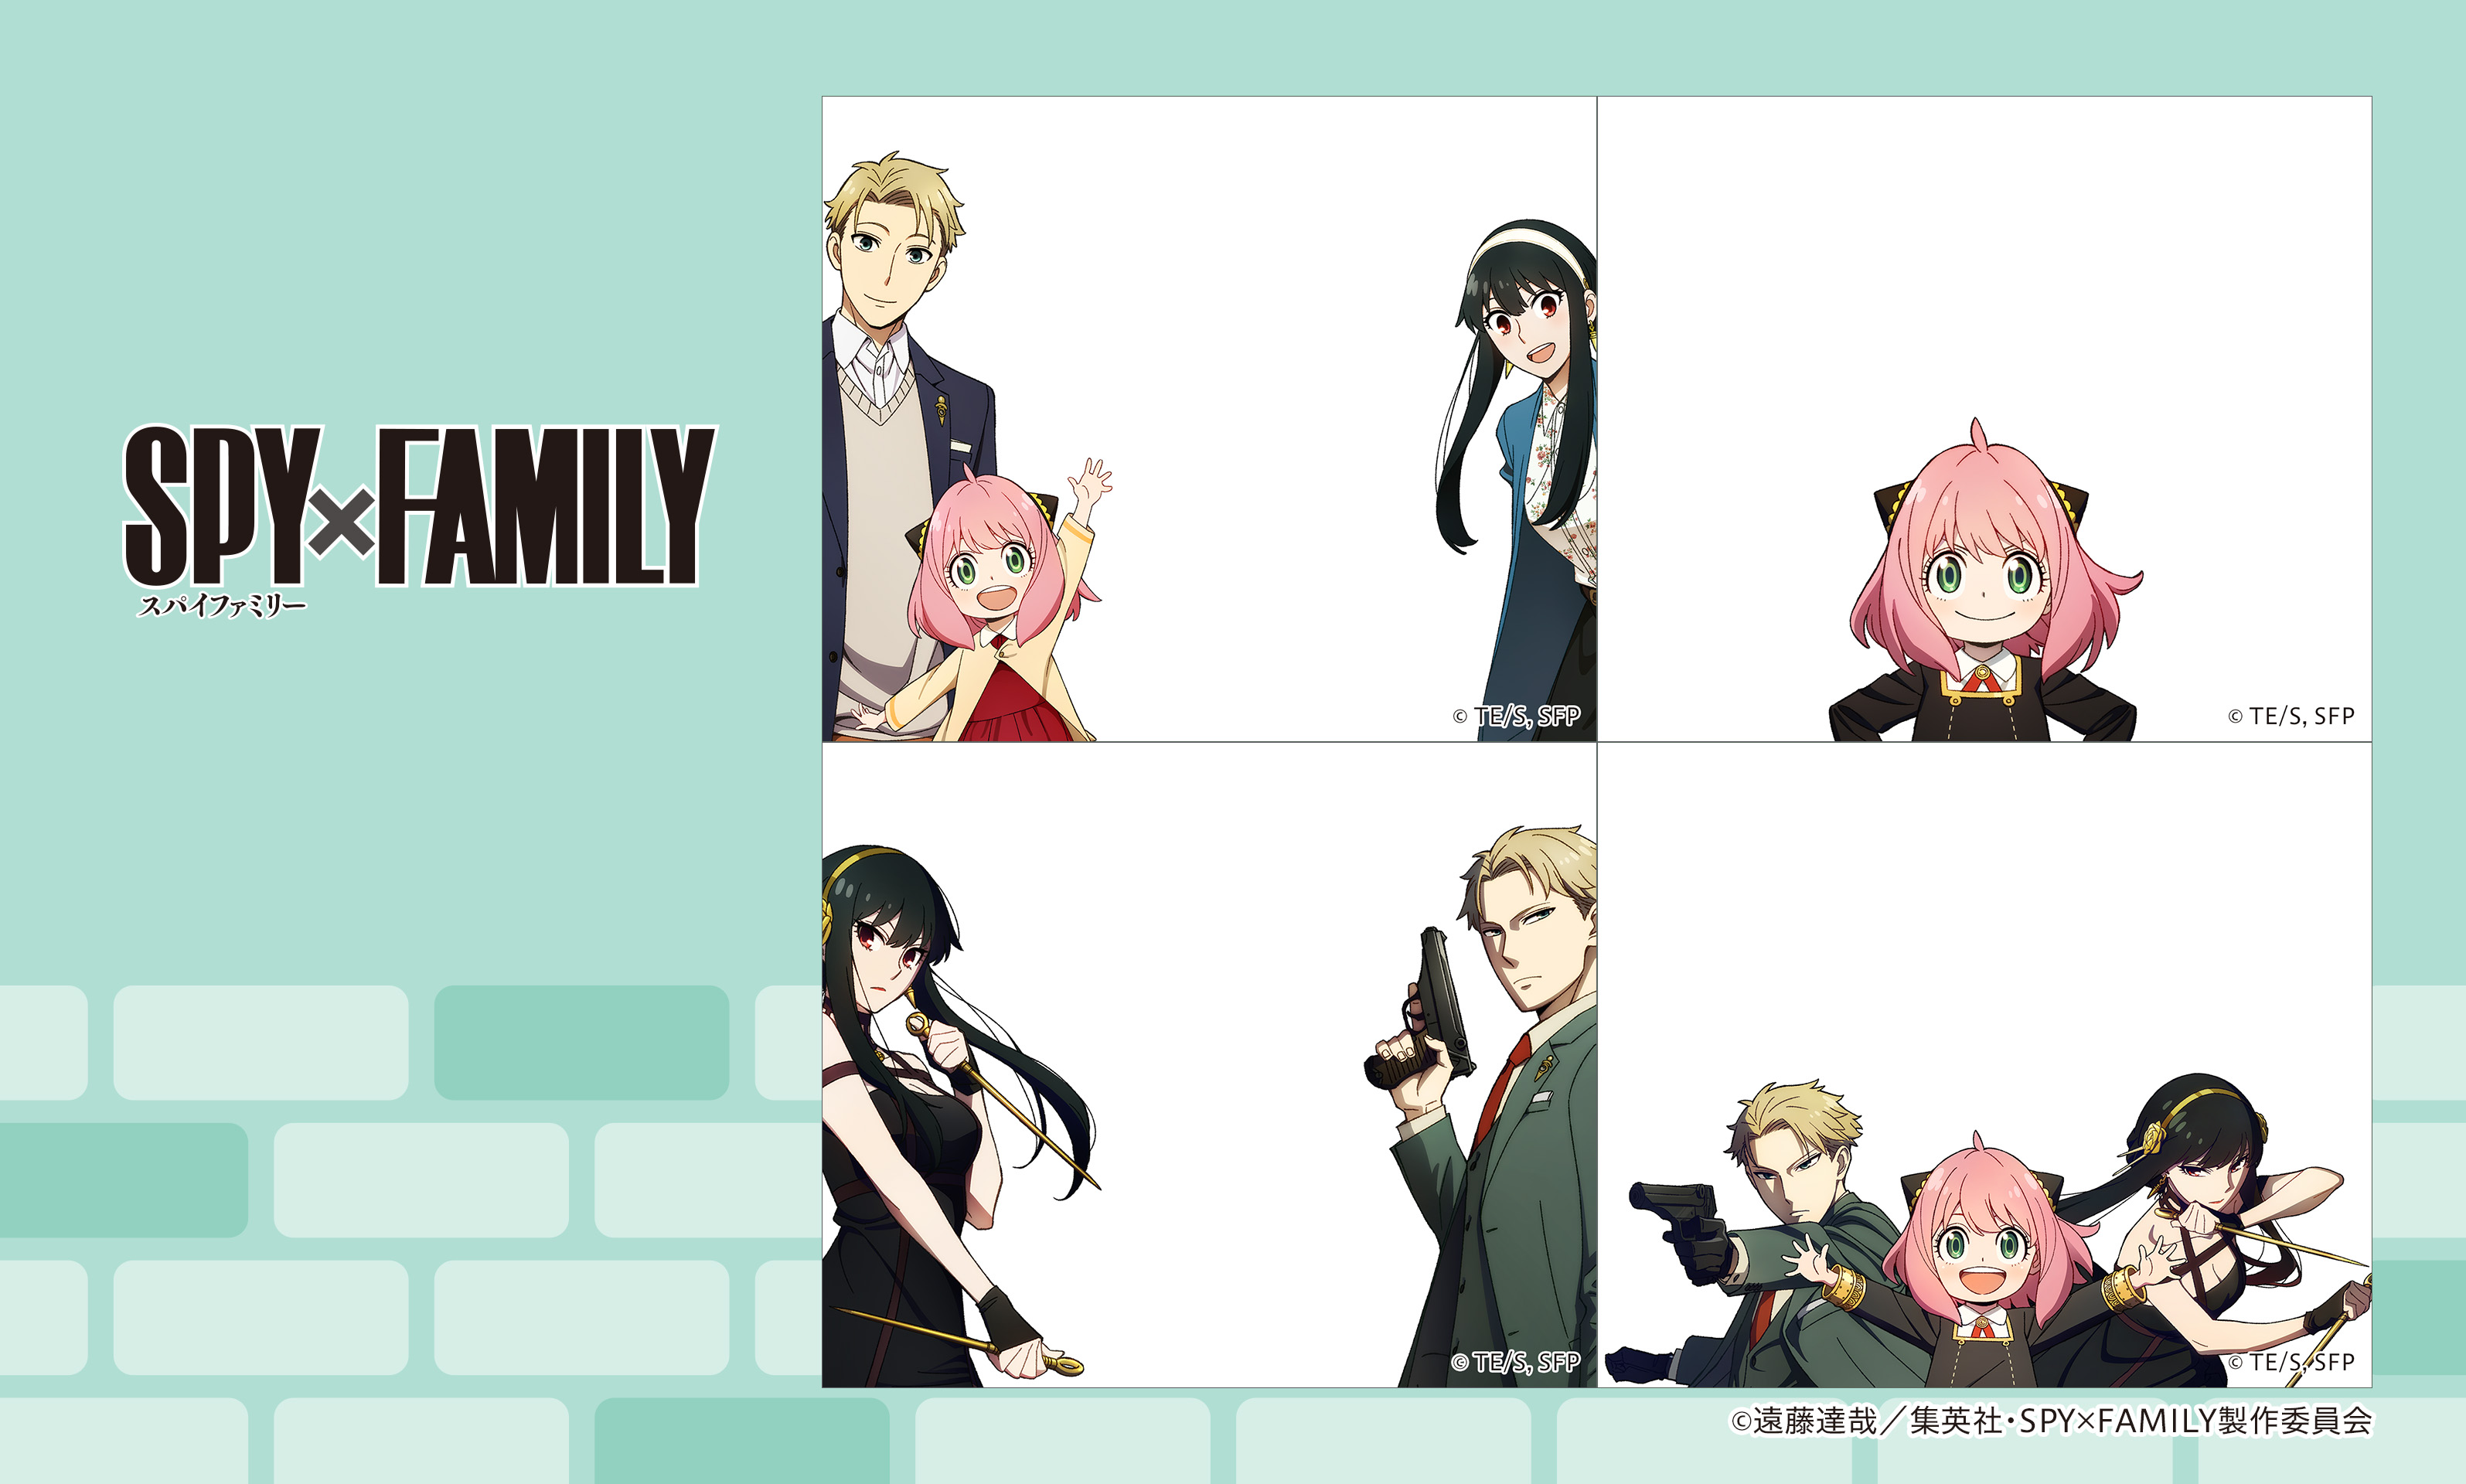 8 most likeable characters in Spy x Family